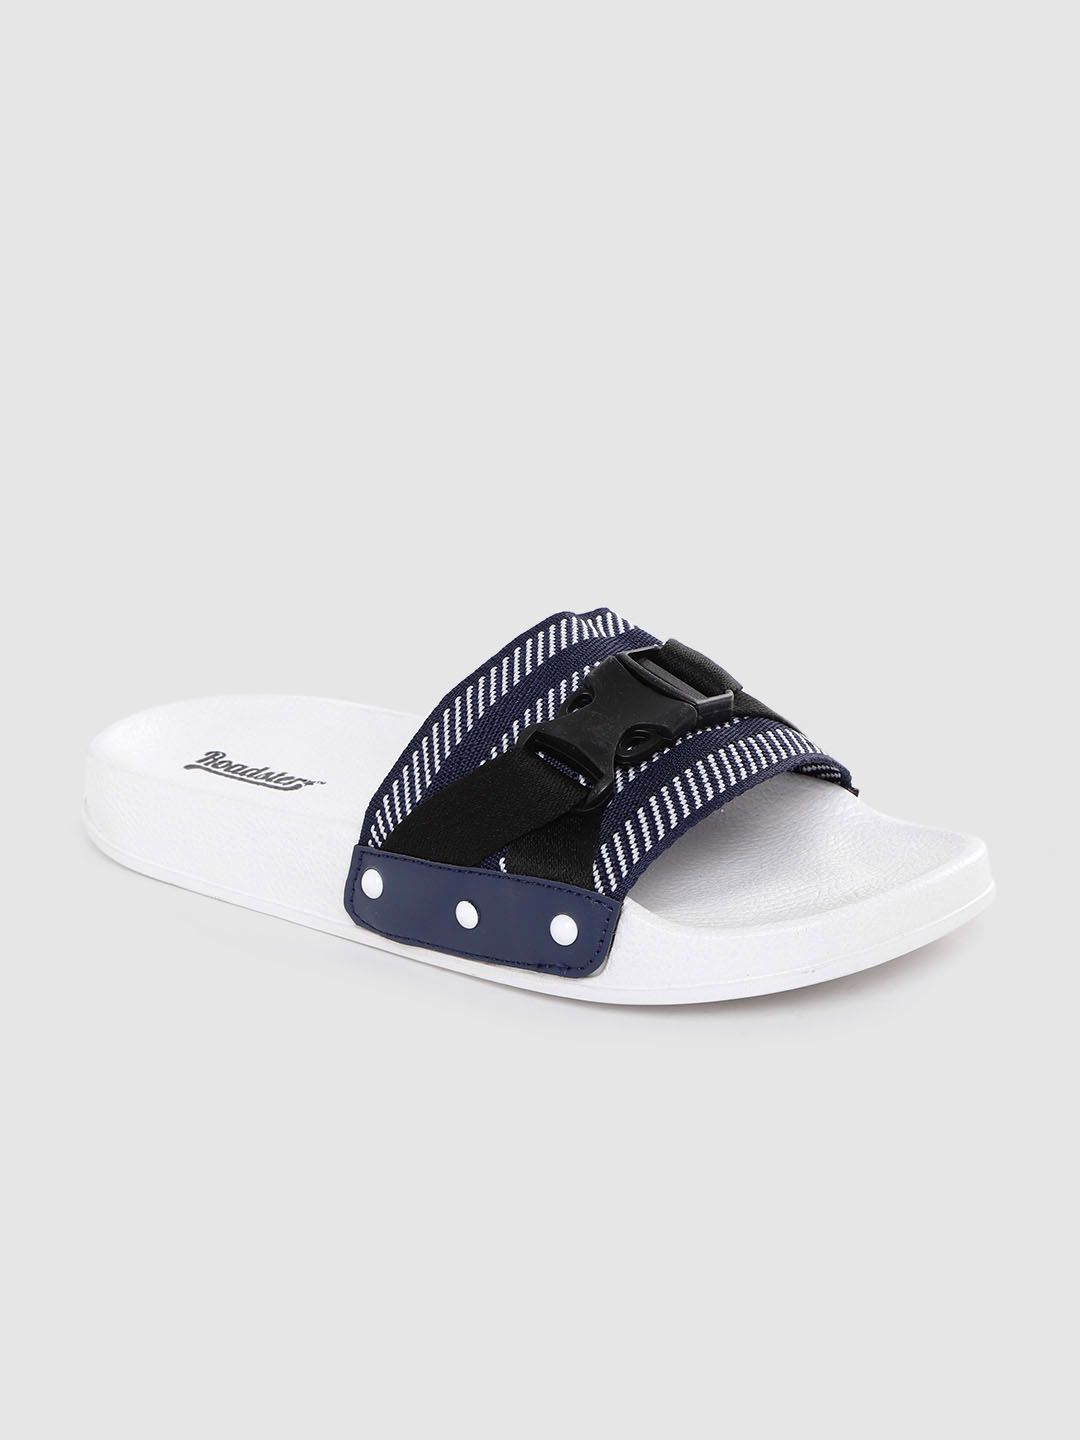 The Roadster Lifestyle Co Women Navy Blue & White Striped Flip Flops with Click Buckle Detail Price in India